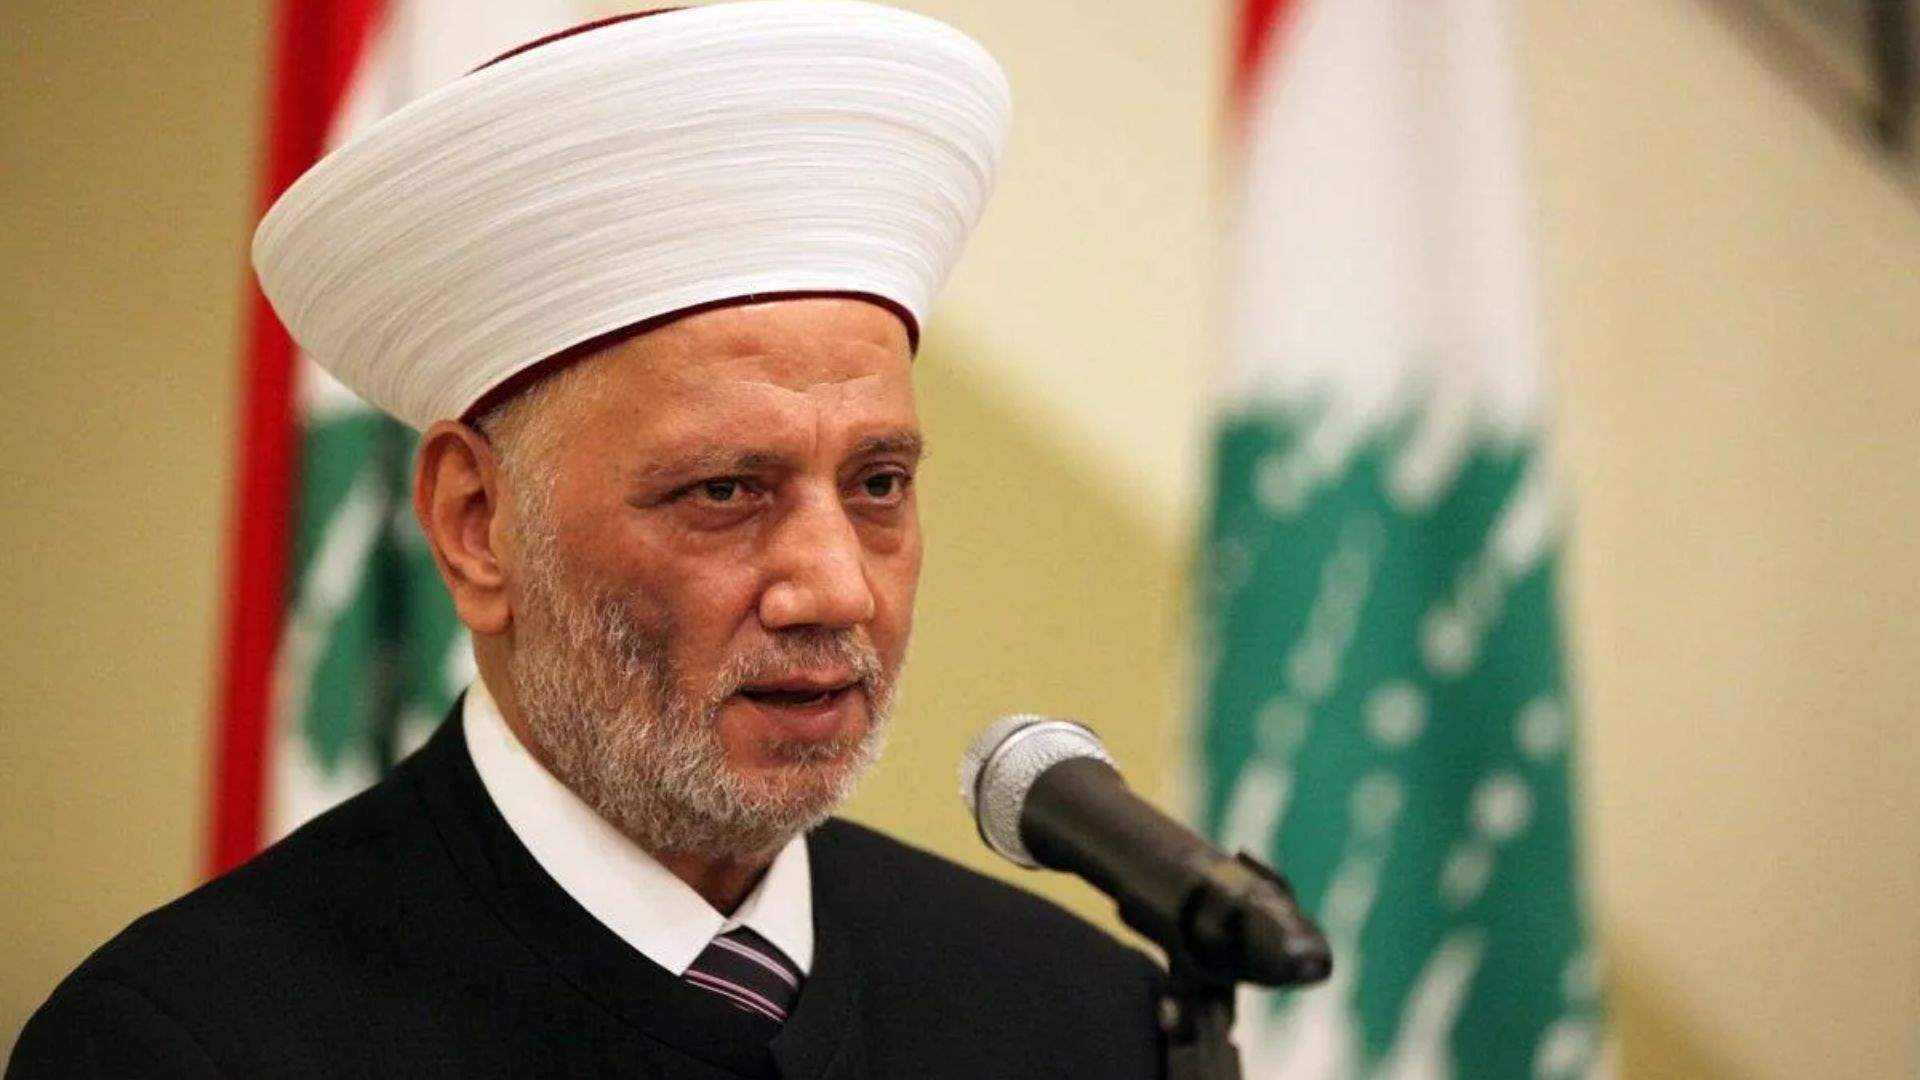 Council of Muftis expresses concern as presidential vacuum continues